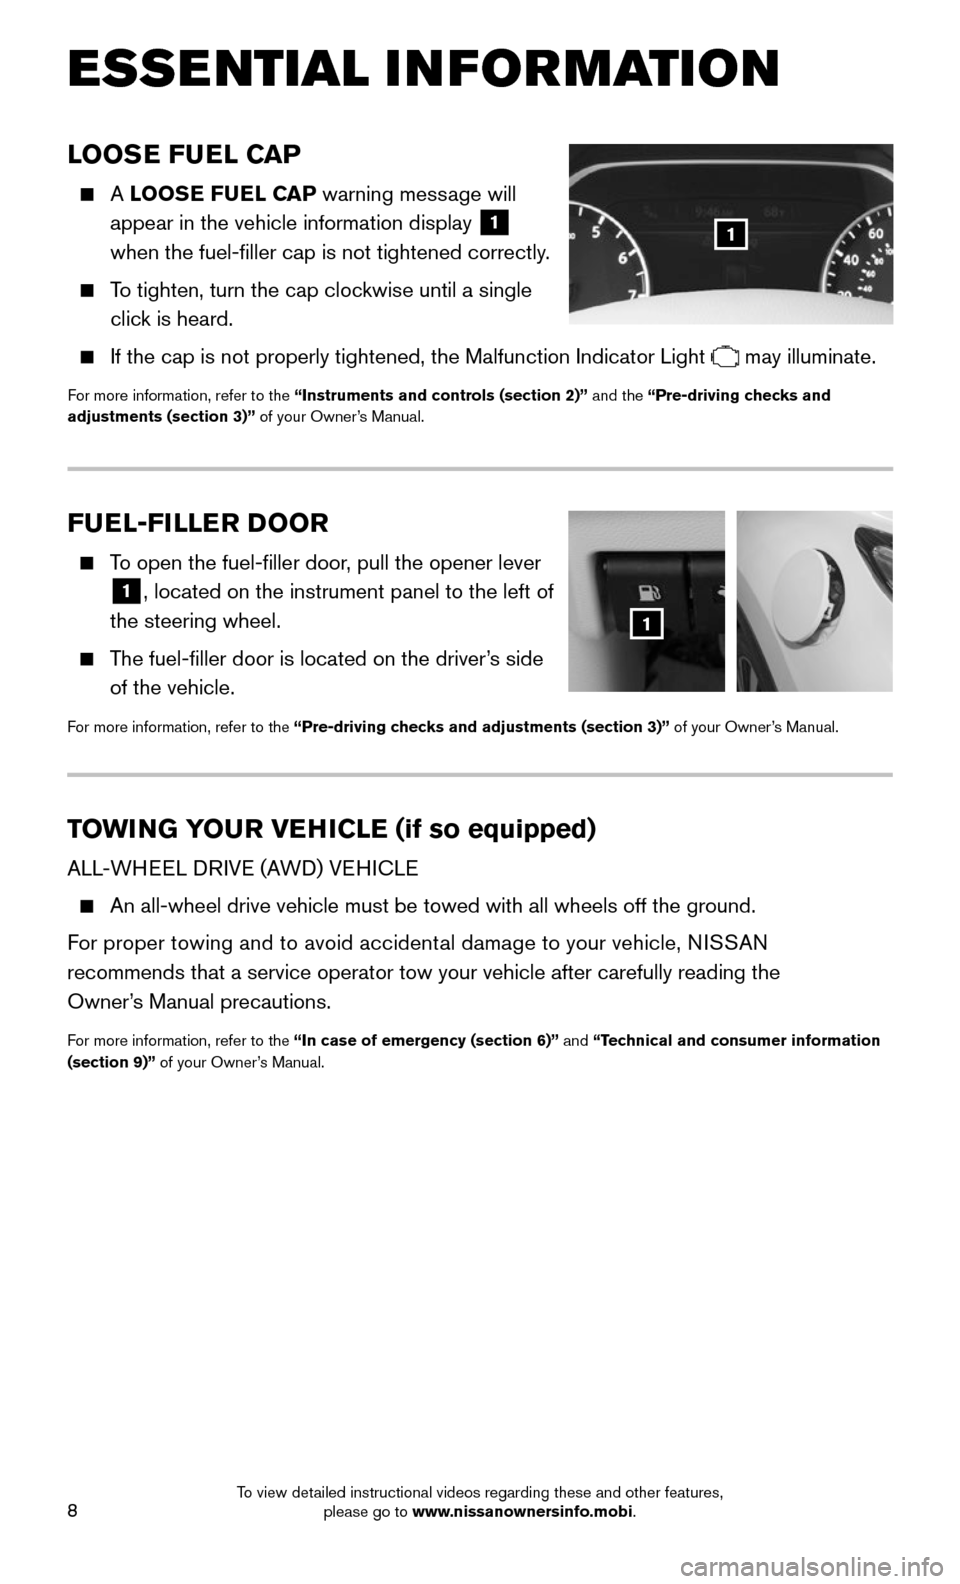 NISSAN MURANO 2015 3.G Quick Reference Guide 8
FUEL-FILLER DOOR
    To open the fuel-filler door, pull the opener lever 
1, located on the instrument panel to the left of 
the steering wheel.
    The fuel-filler door is located on the driver’s